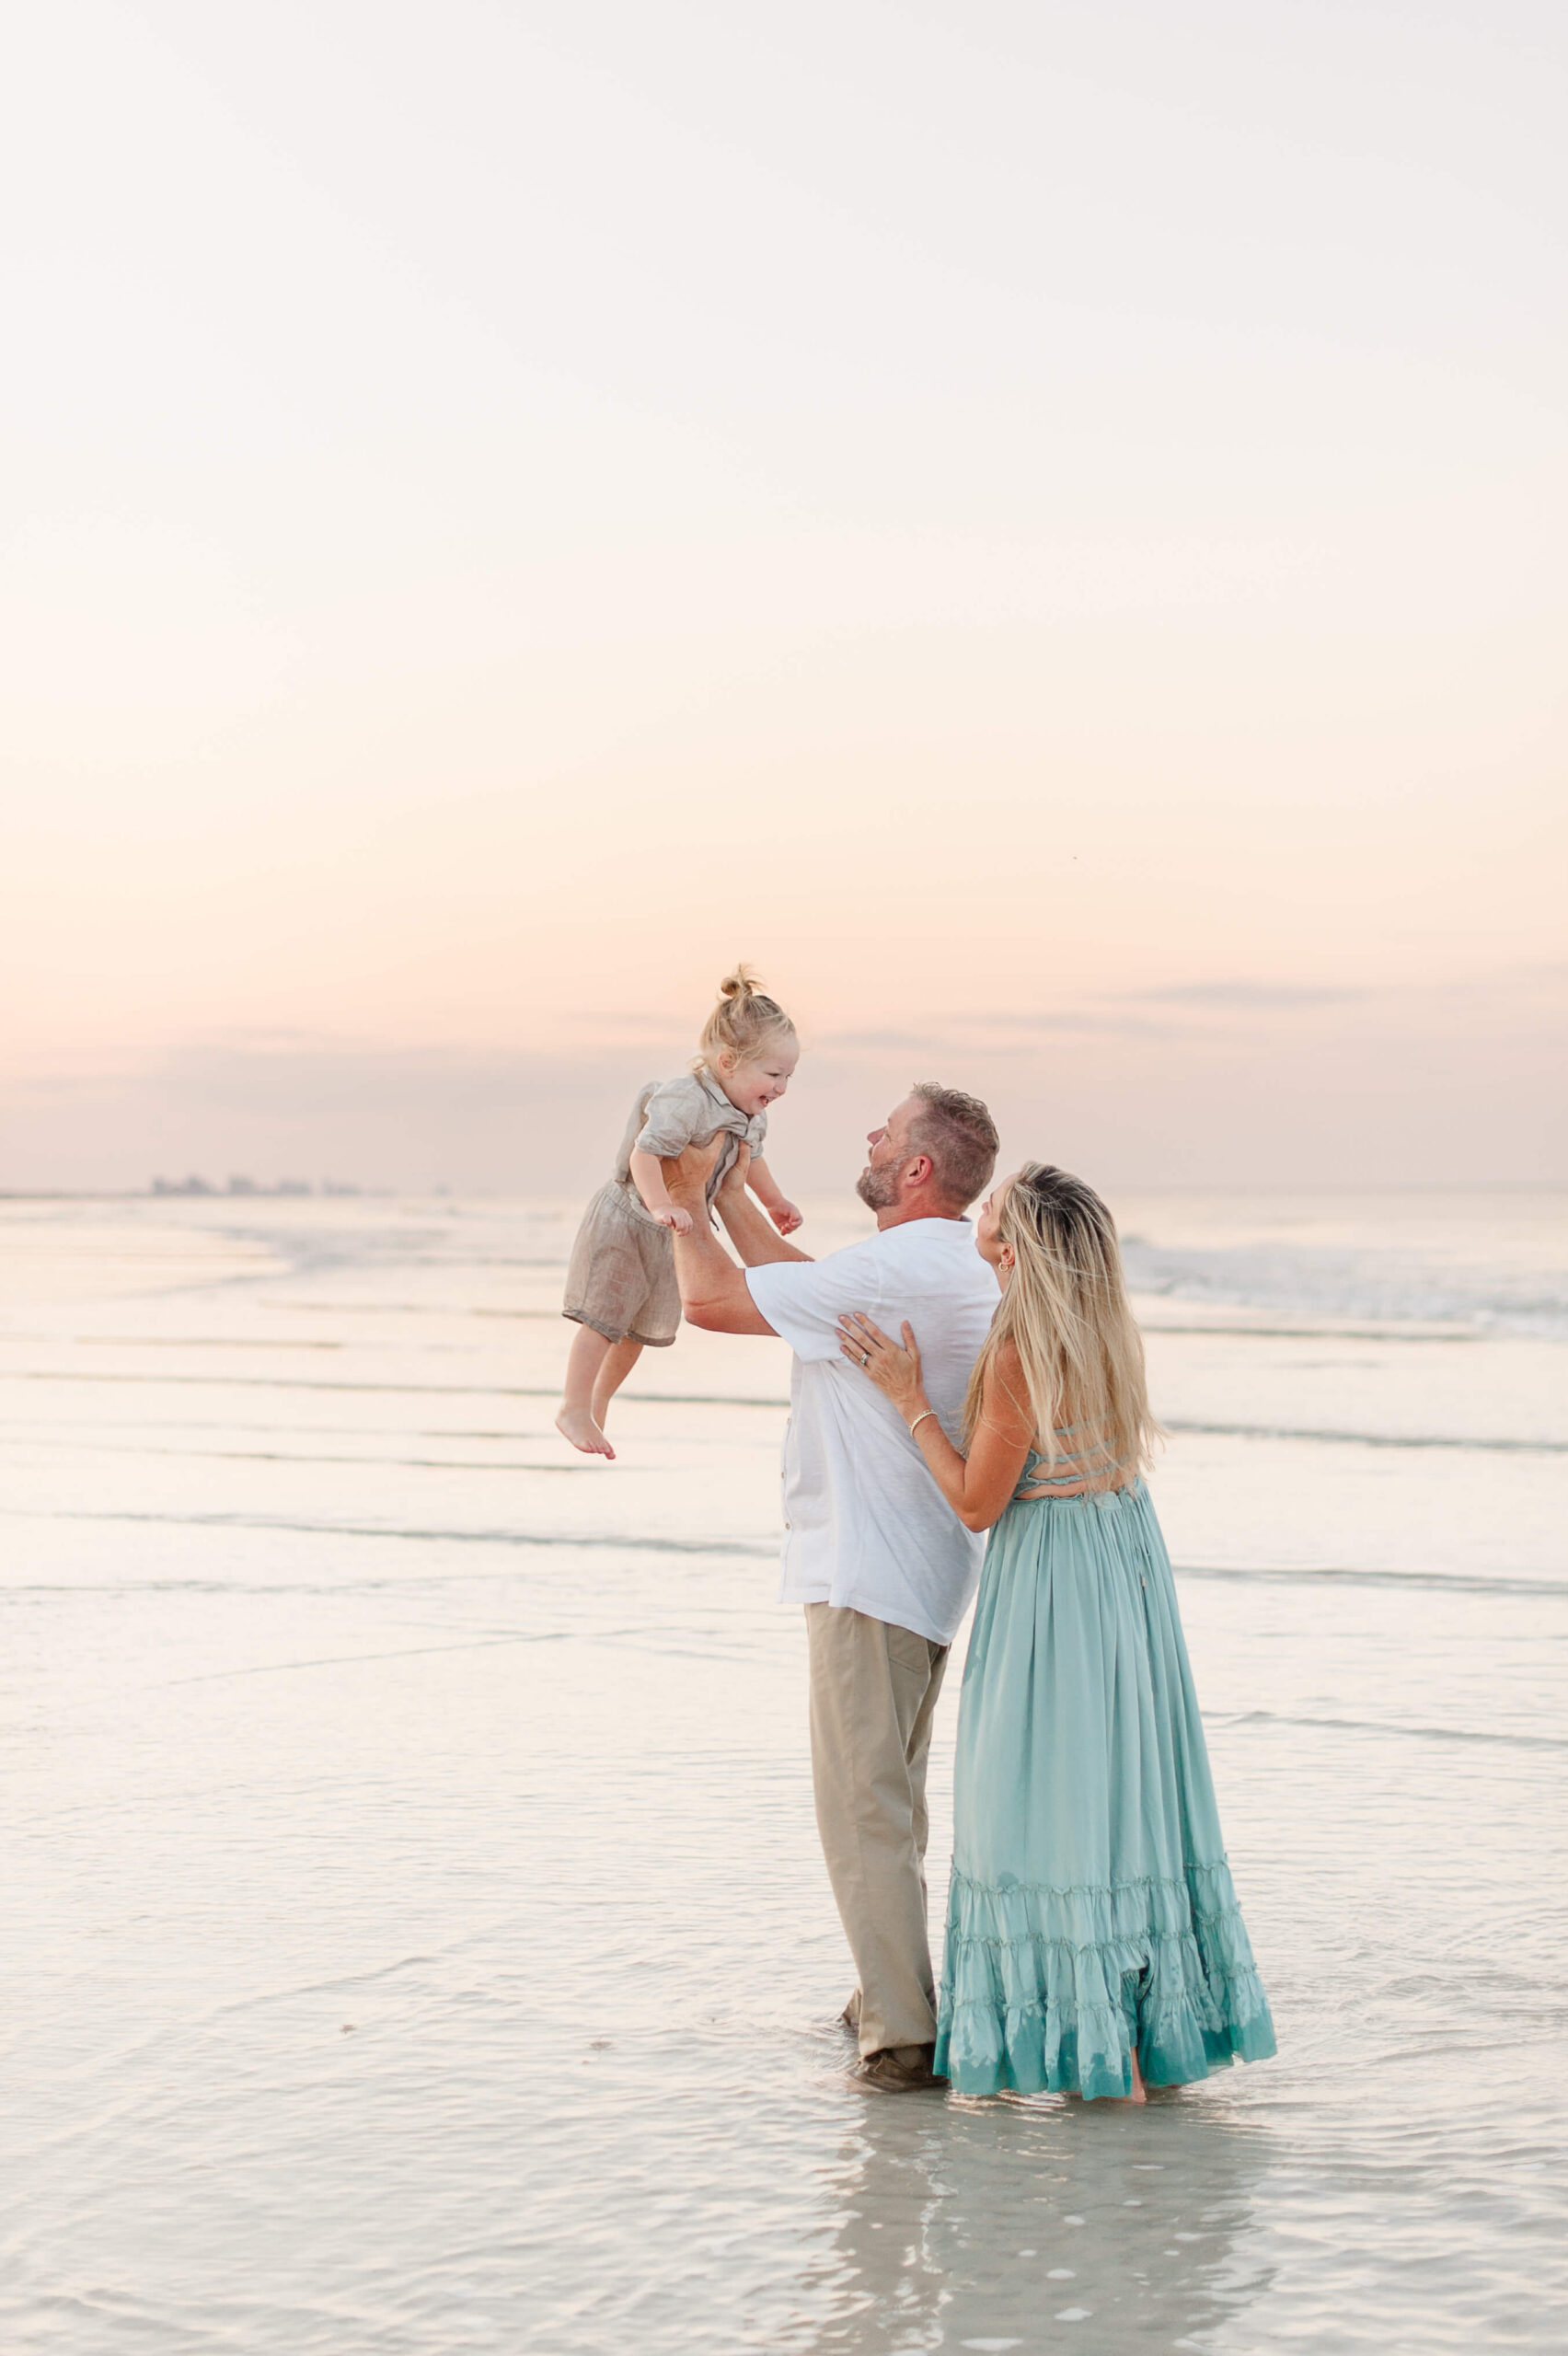 Stunning sunset image along the coastline of parents holding their son in the air. 